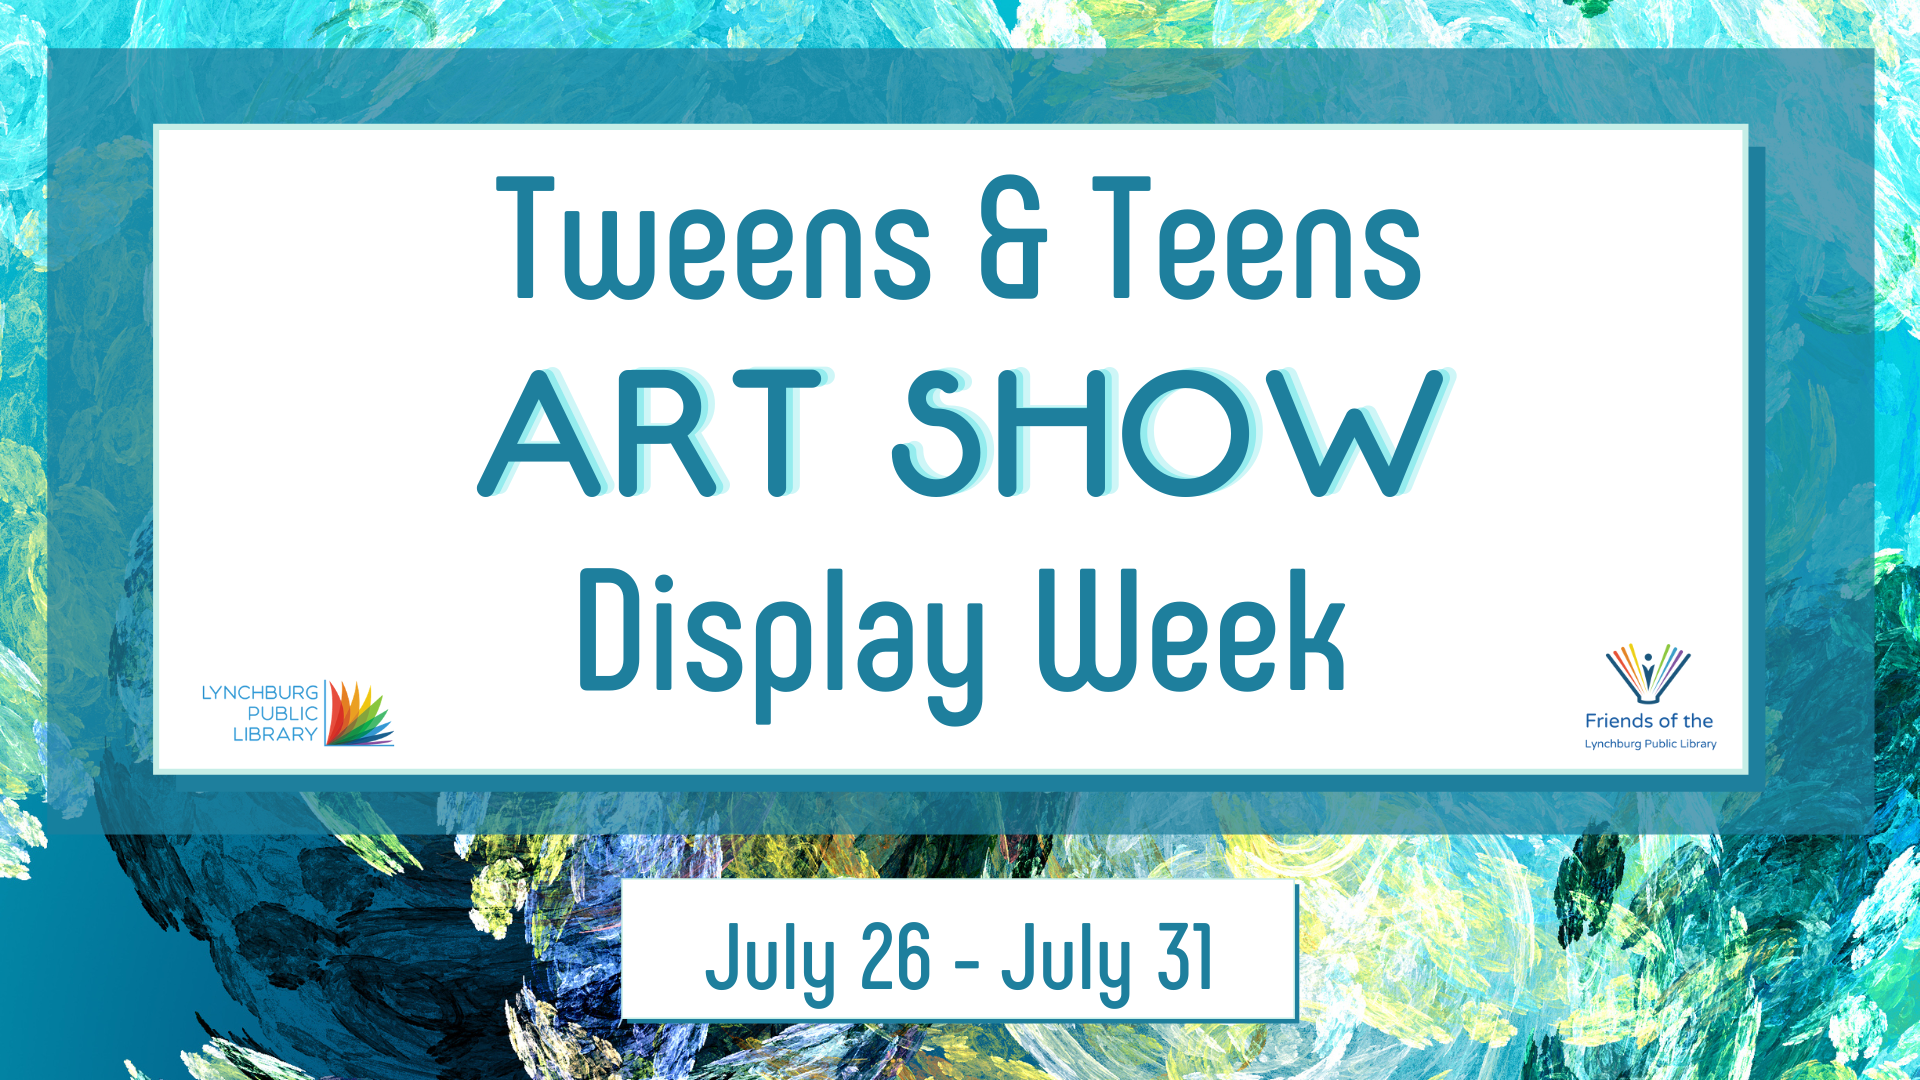 Image features paint splattered background. Text states Tweens & Teens Art Show Display Week July 26 - July 31